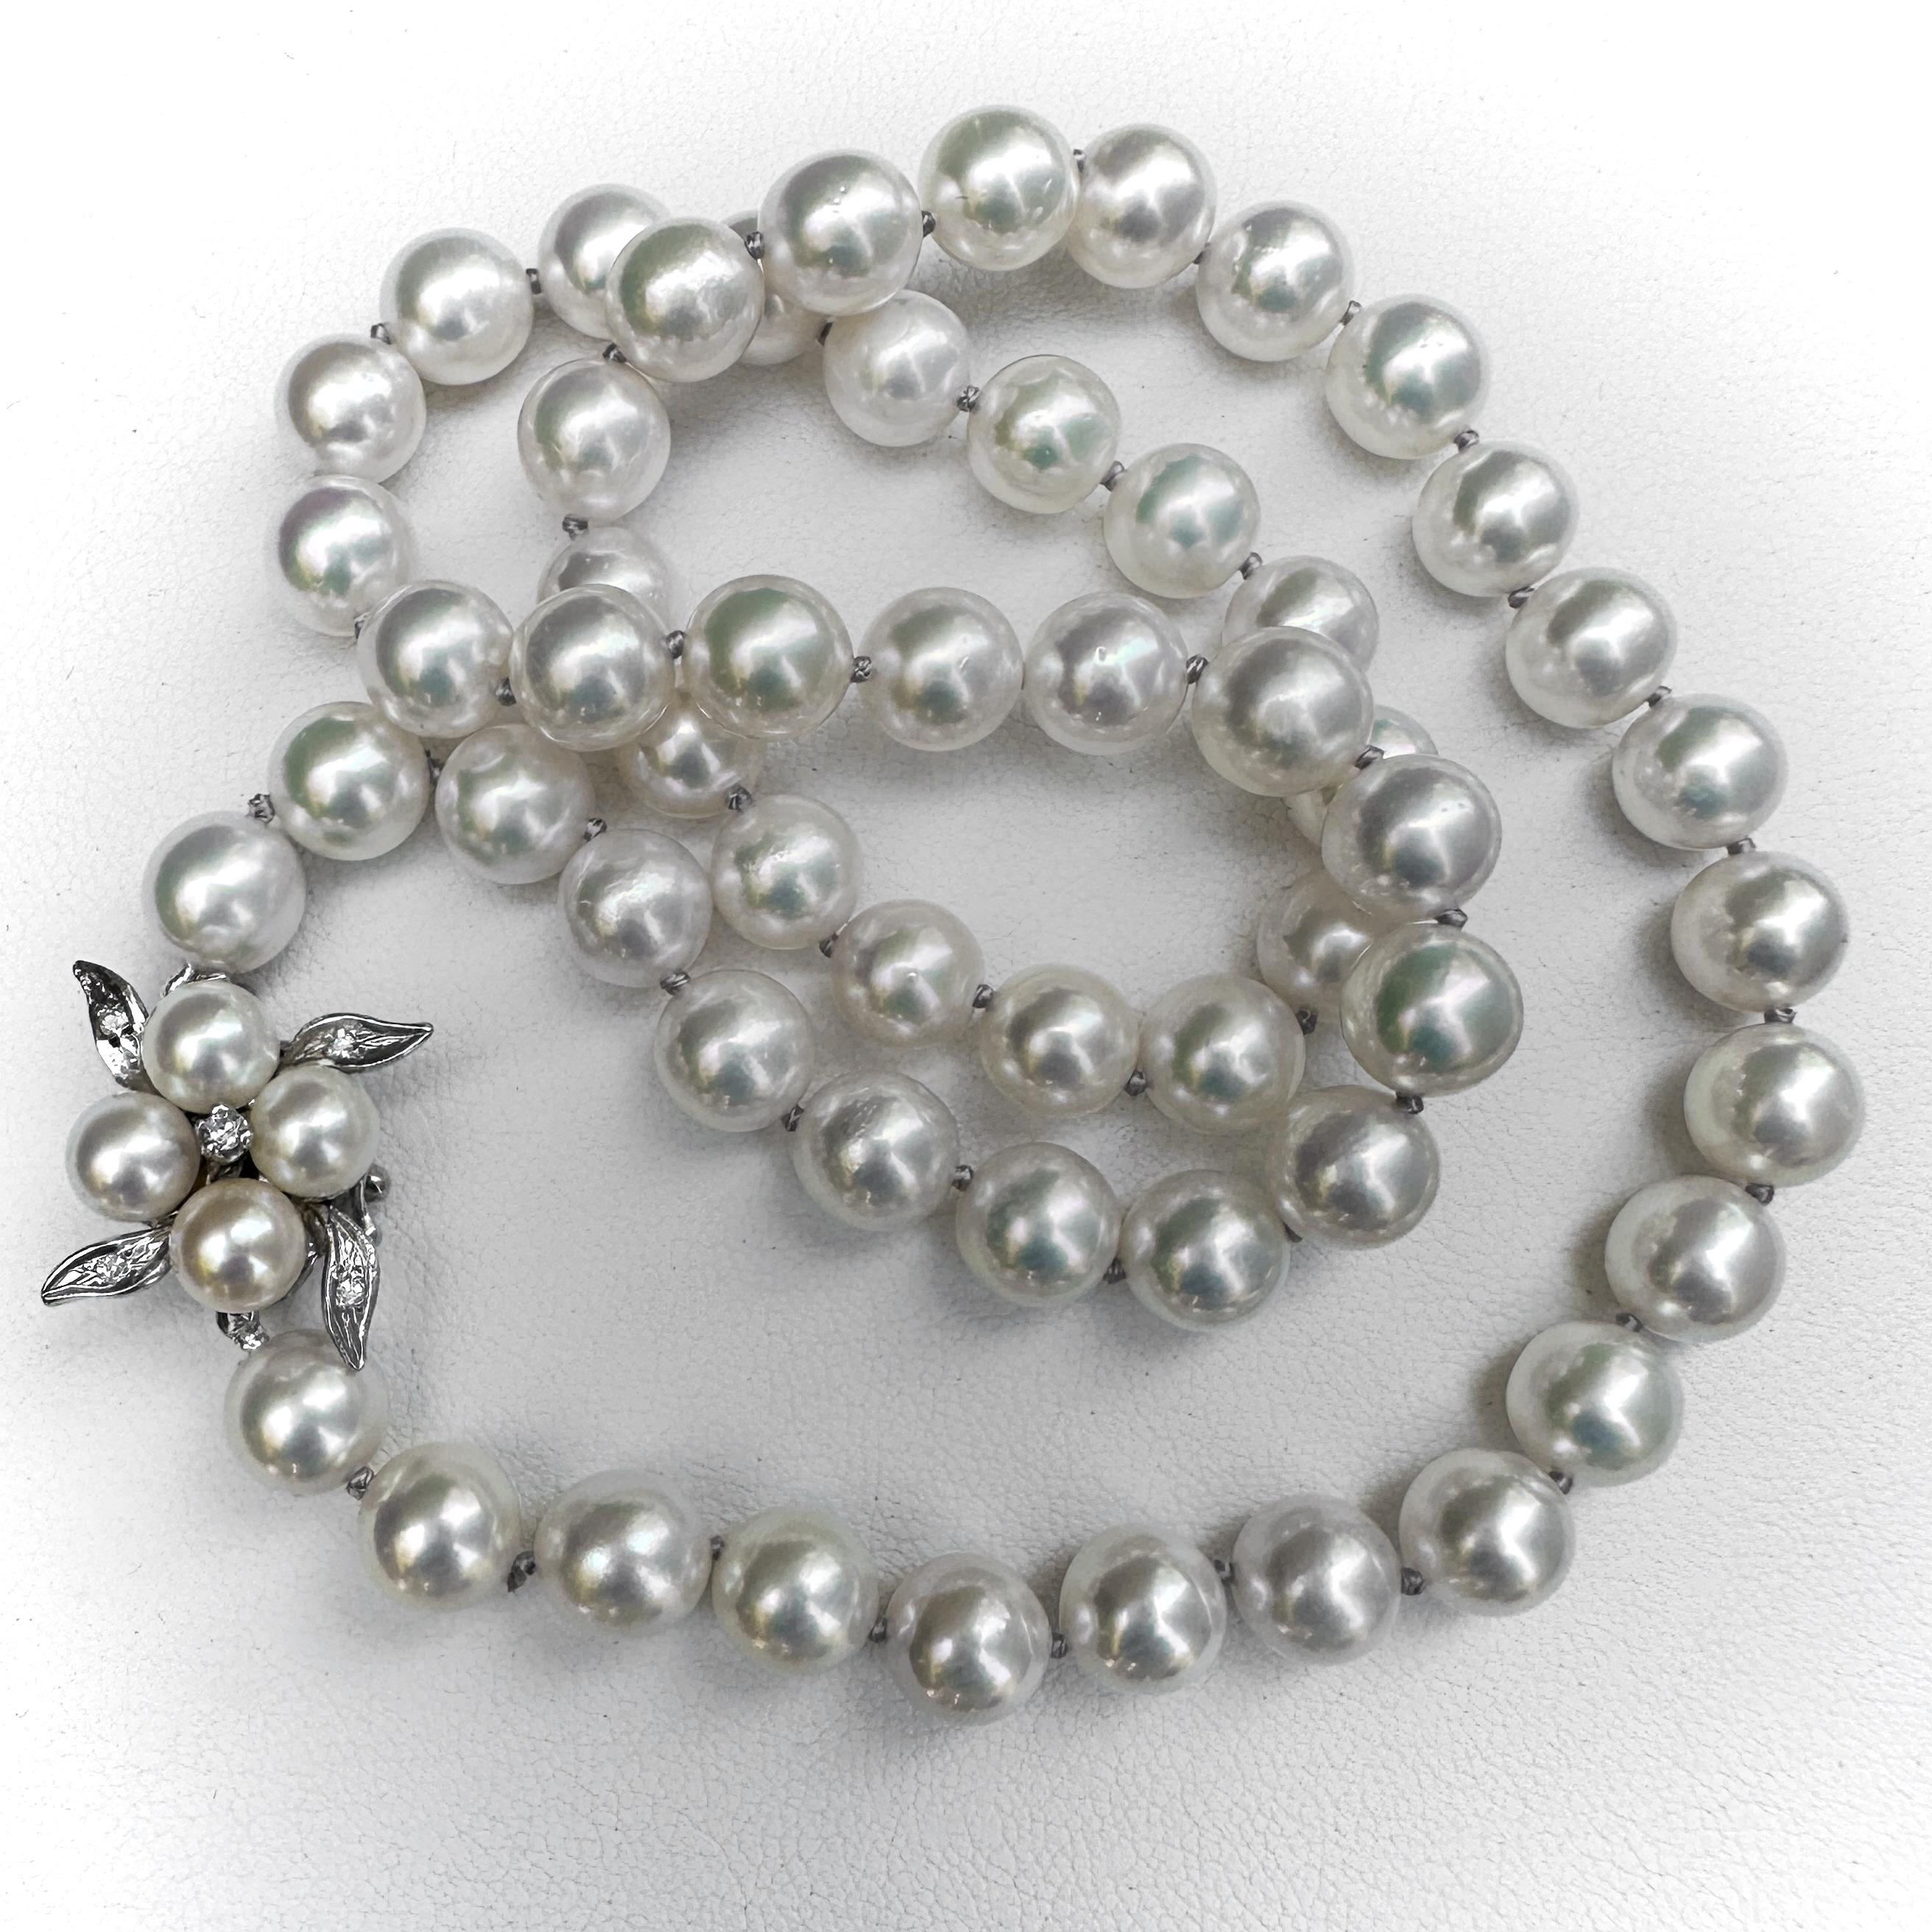 Princess Length 7mm Akoya Pearl Necklace with Vintage White Gold & Diamond Clasp For Sale 1